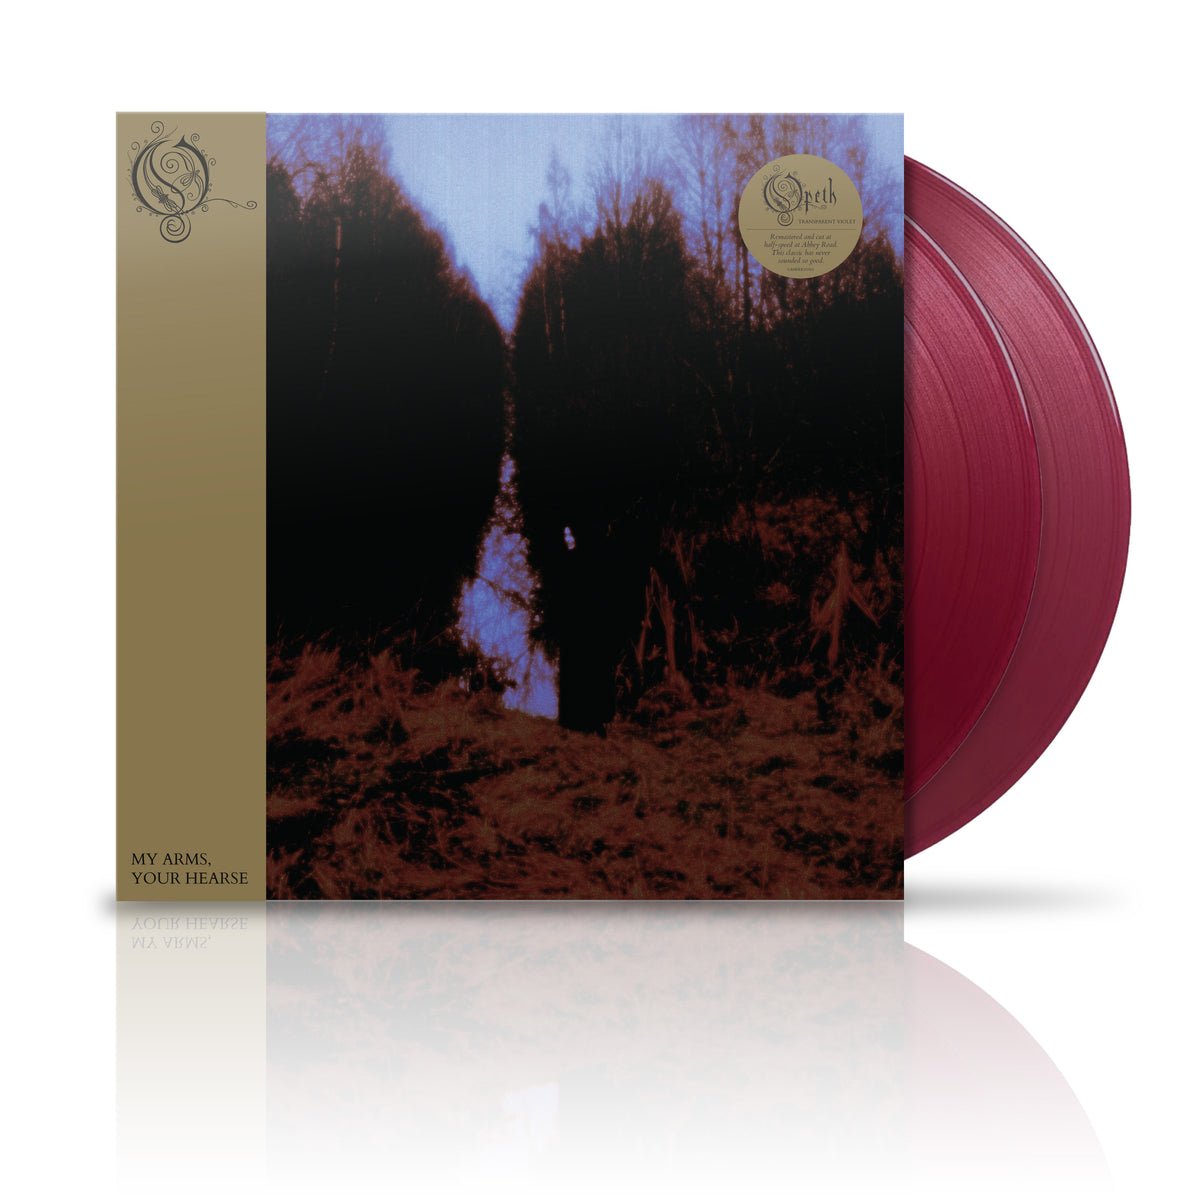 CD Shop - OPETH MY ARMS YOUR HEARSE VIOLET LTD.